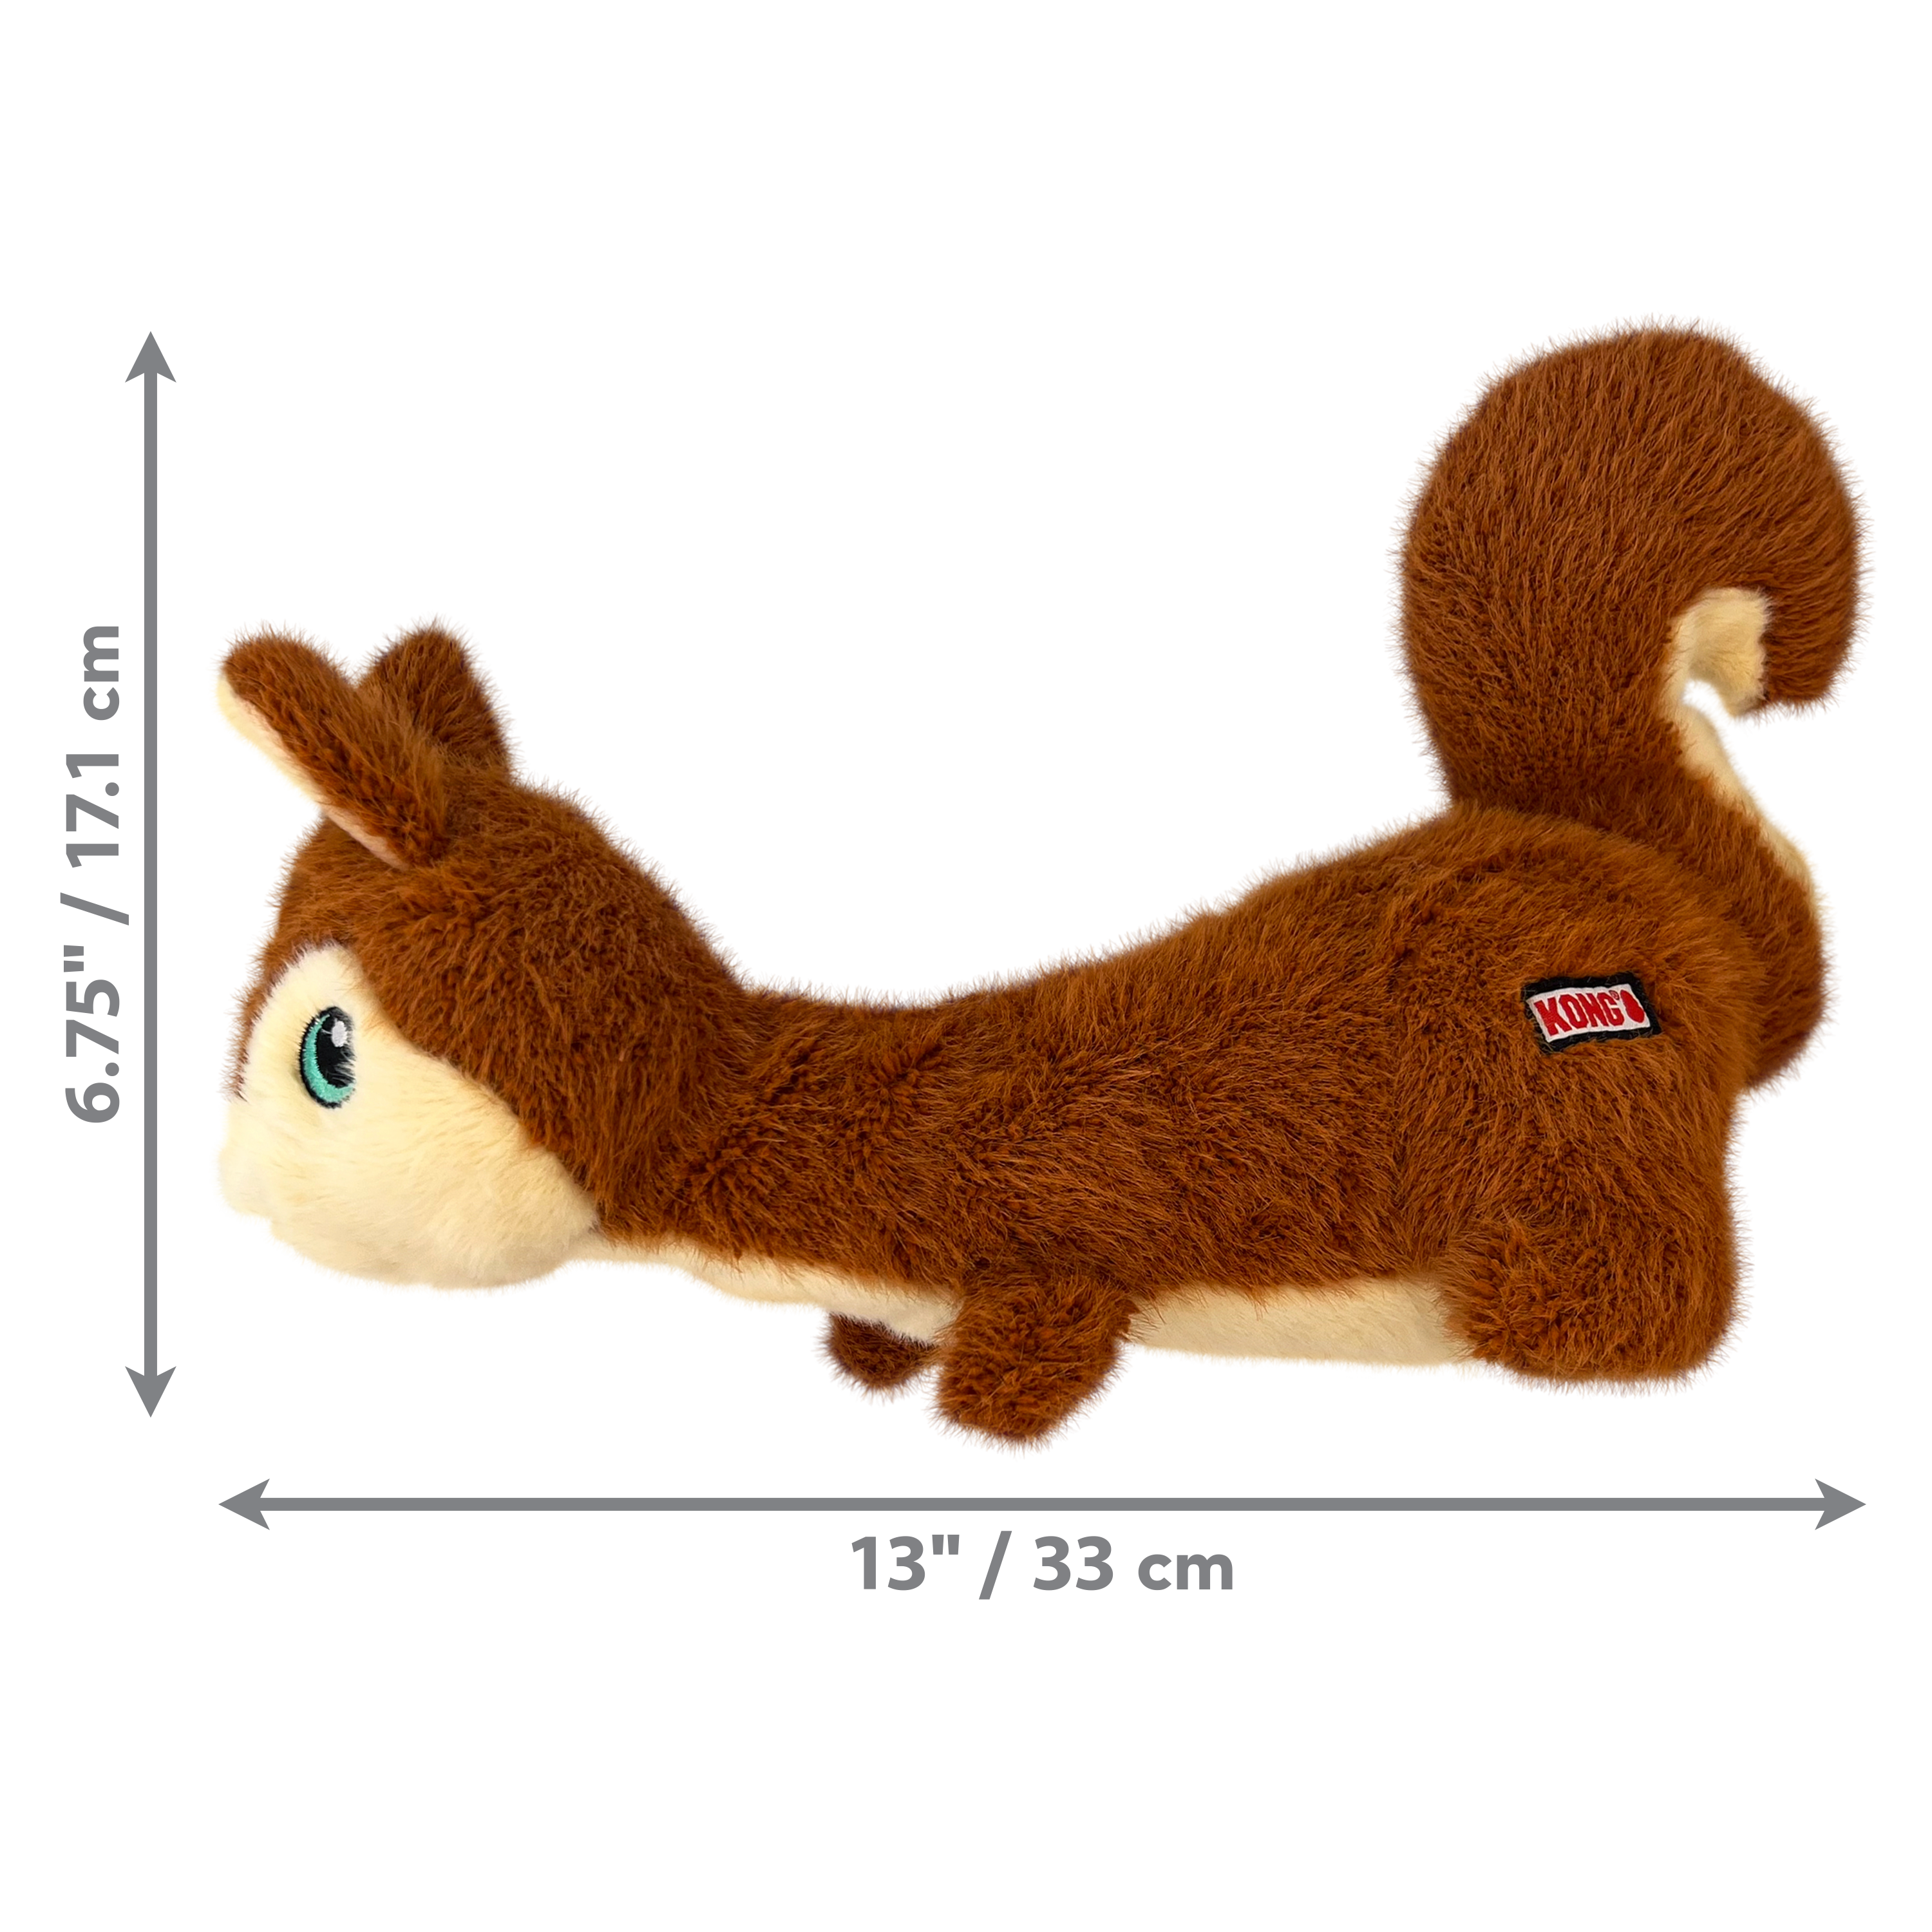 Scruffs Squirrel dimoffpack product image